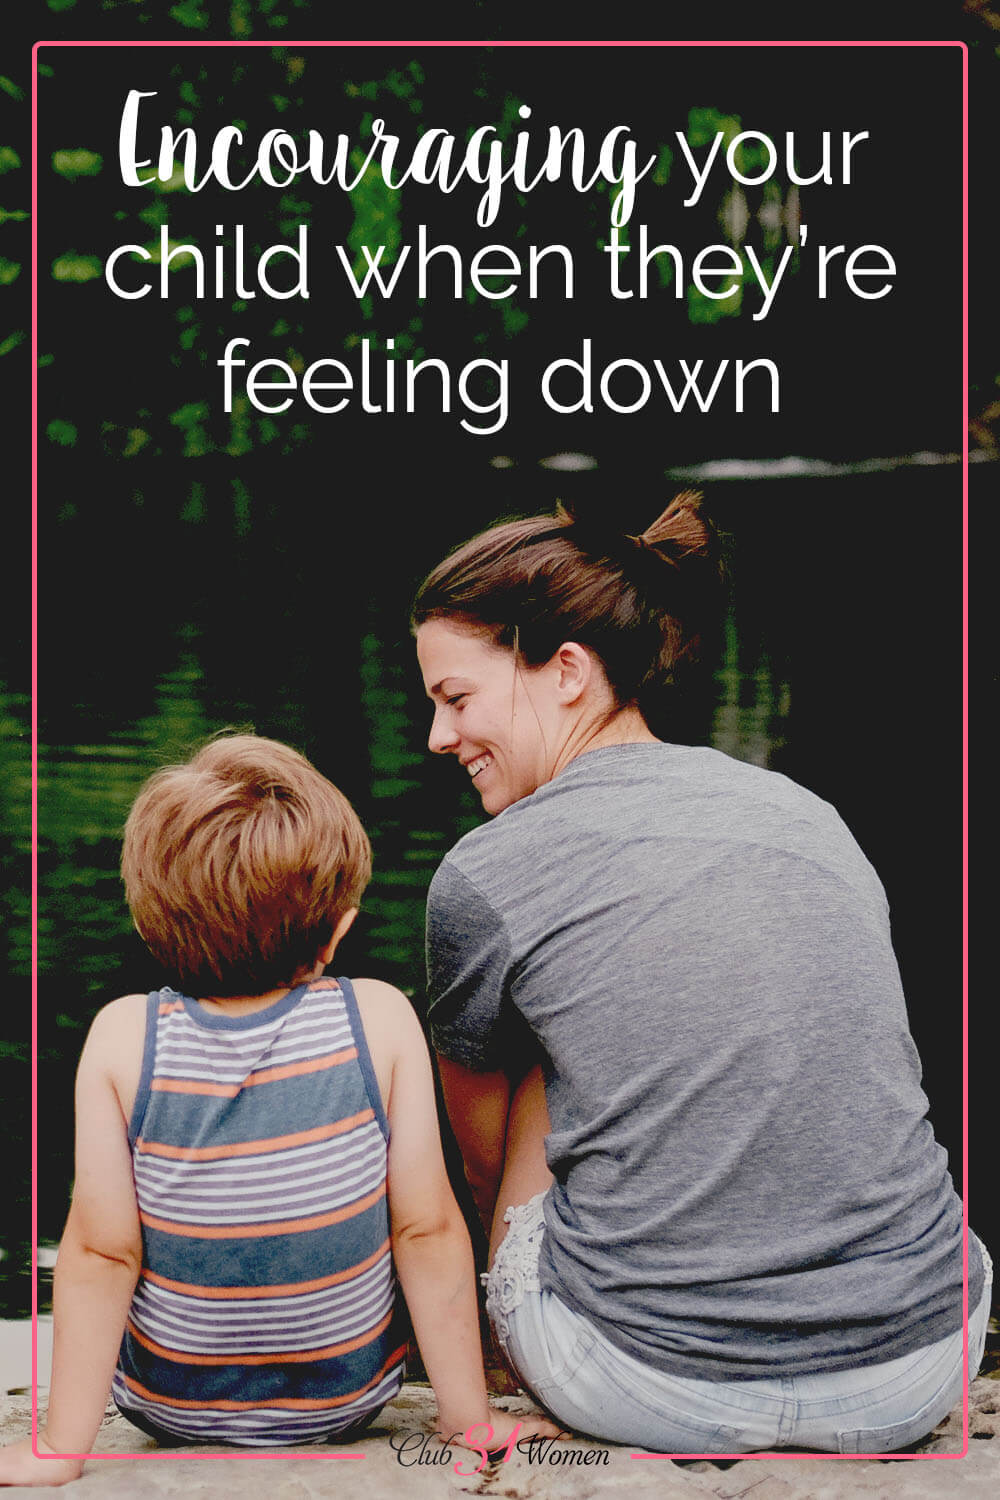 How can you encourage your child when they are experiencing dismay or depression? Here is a word to support your child in these times. via @Club31Women